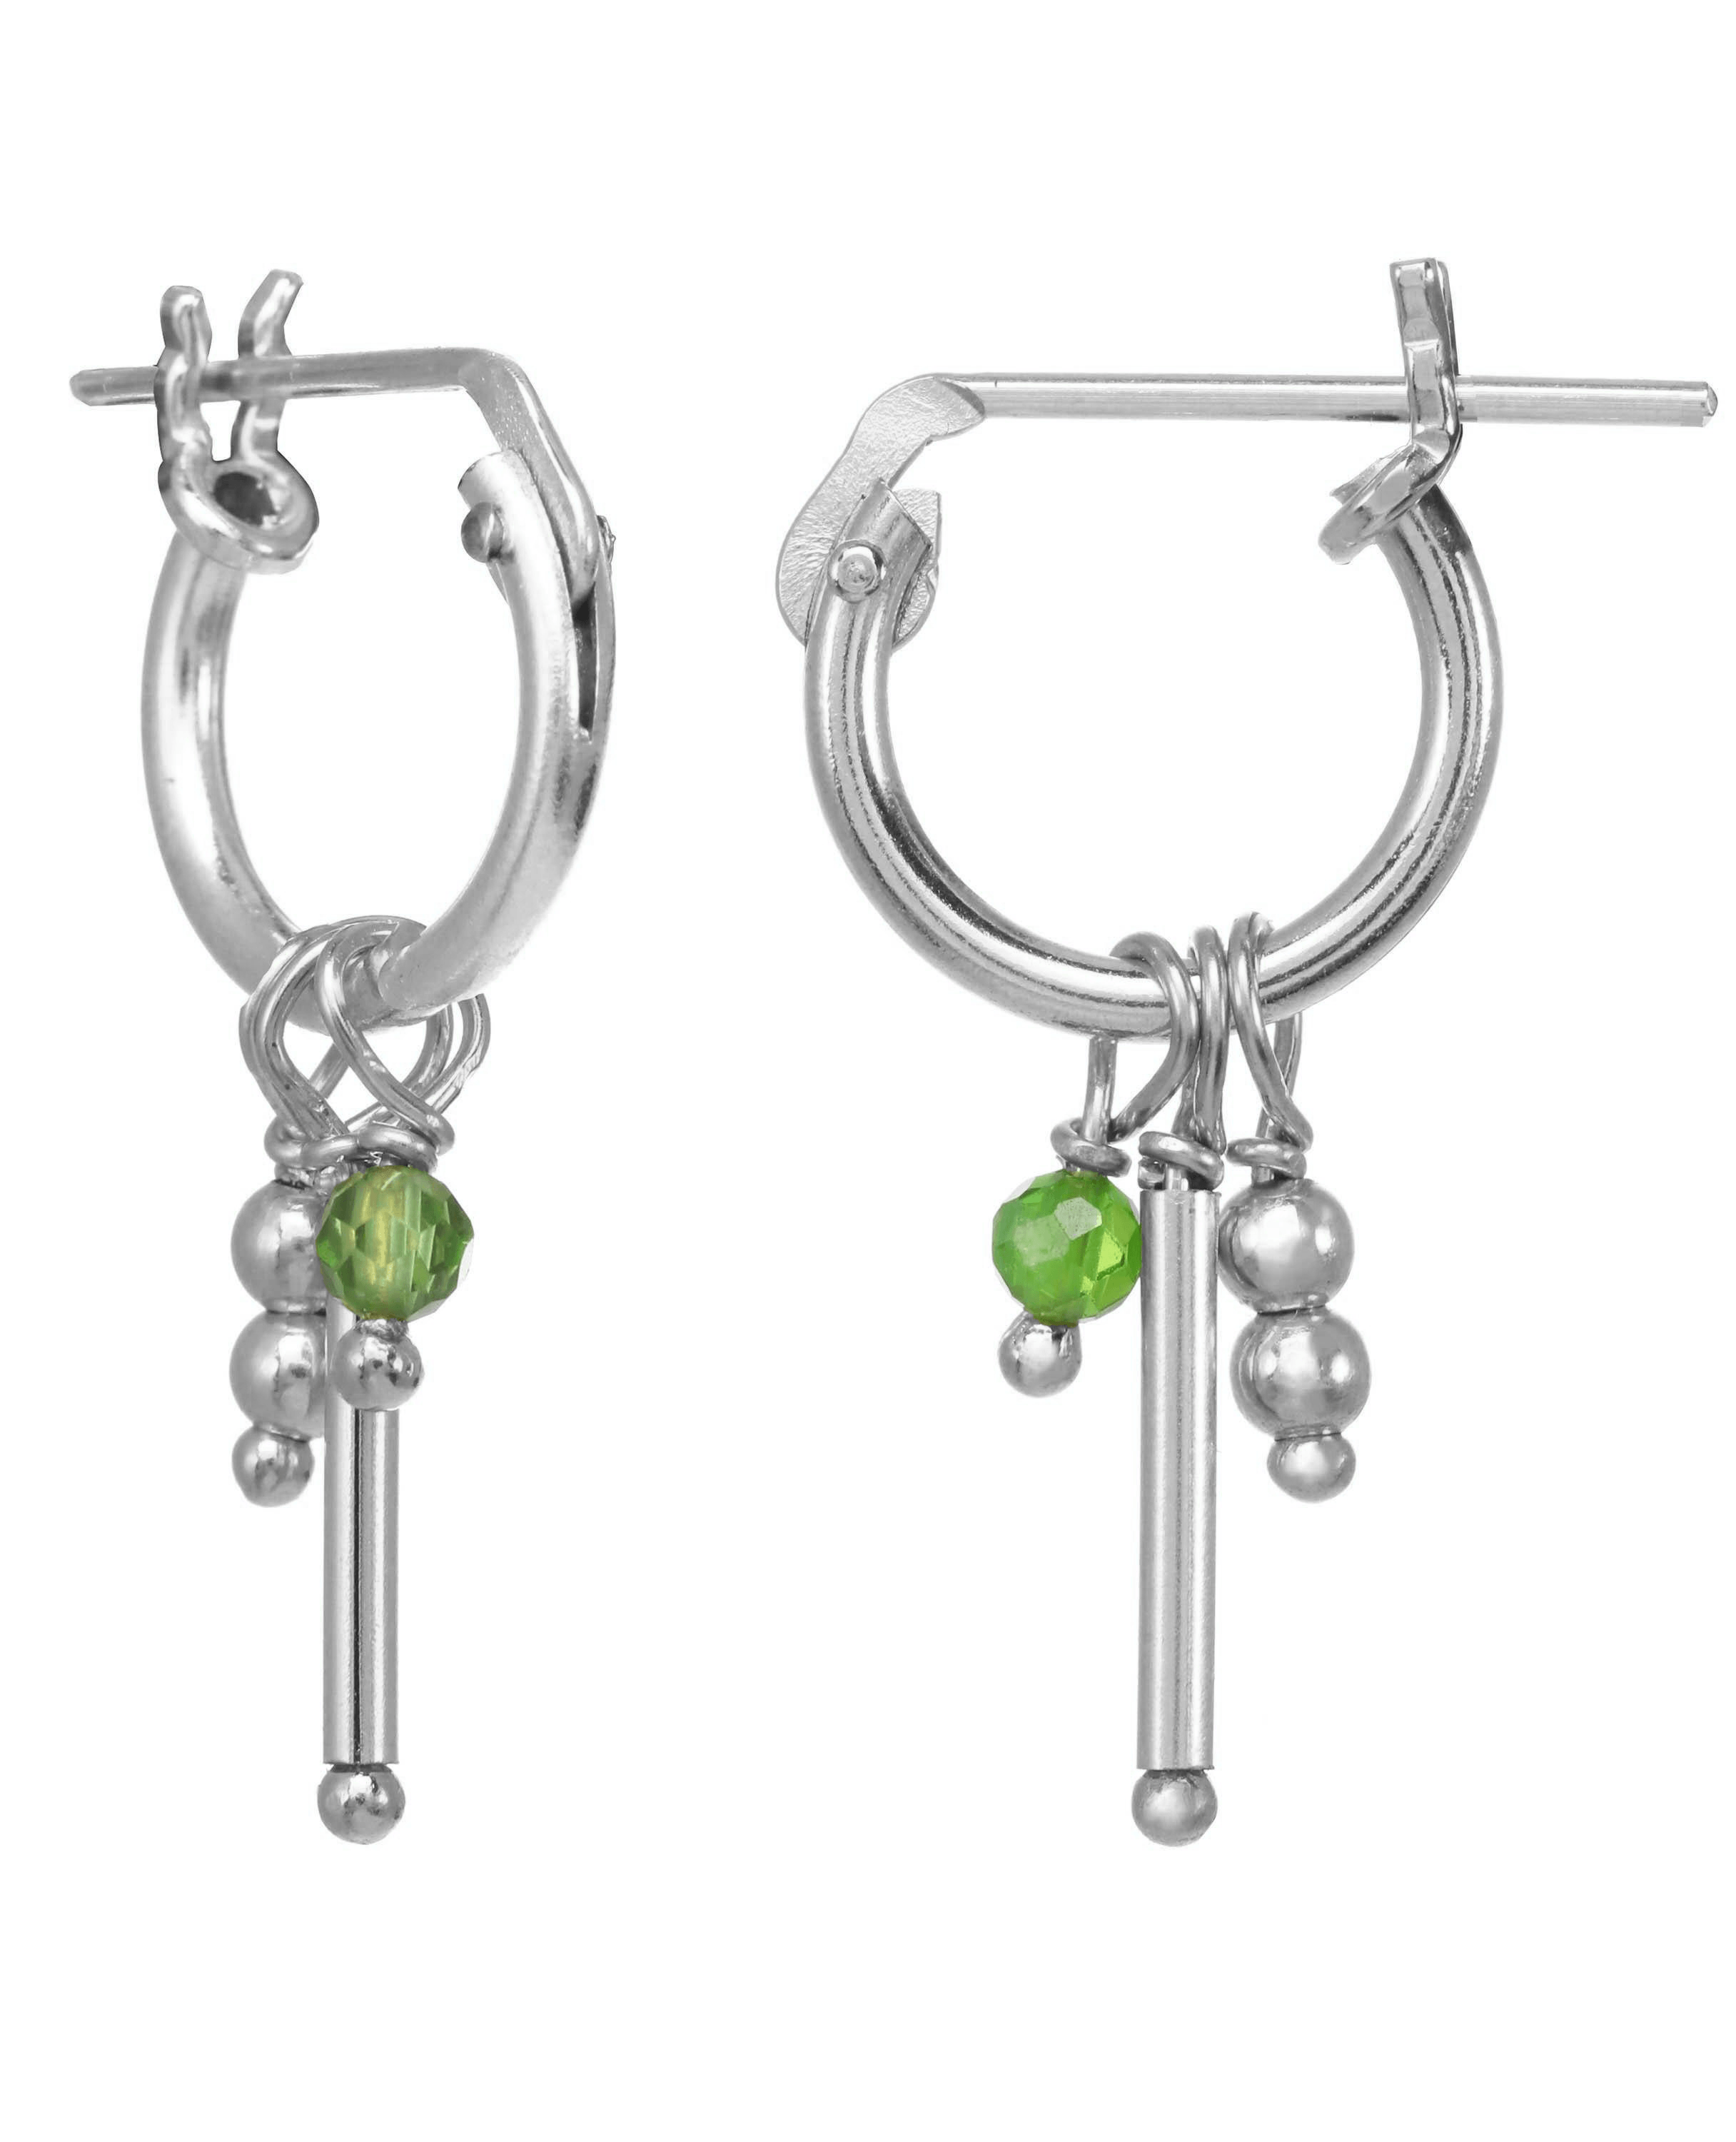 Misty Hoop Earrings by KOZAKH. 10mm snap hoop earrings in Sterling Silver, featuring a 2mm faceted gem, a vertical bar, and seamless beads.